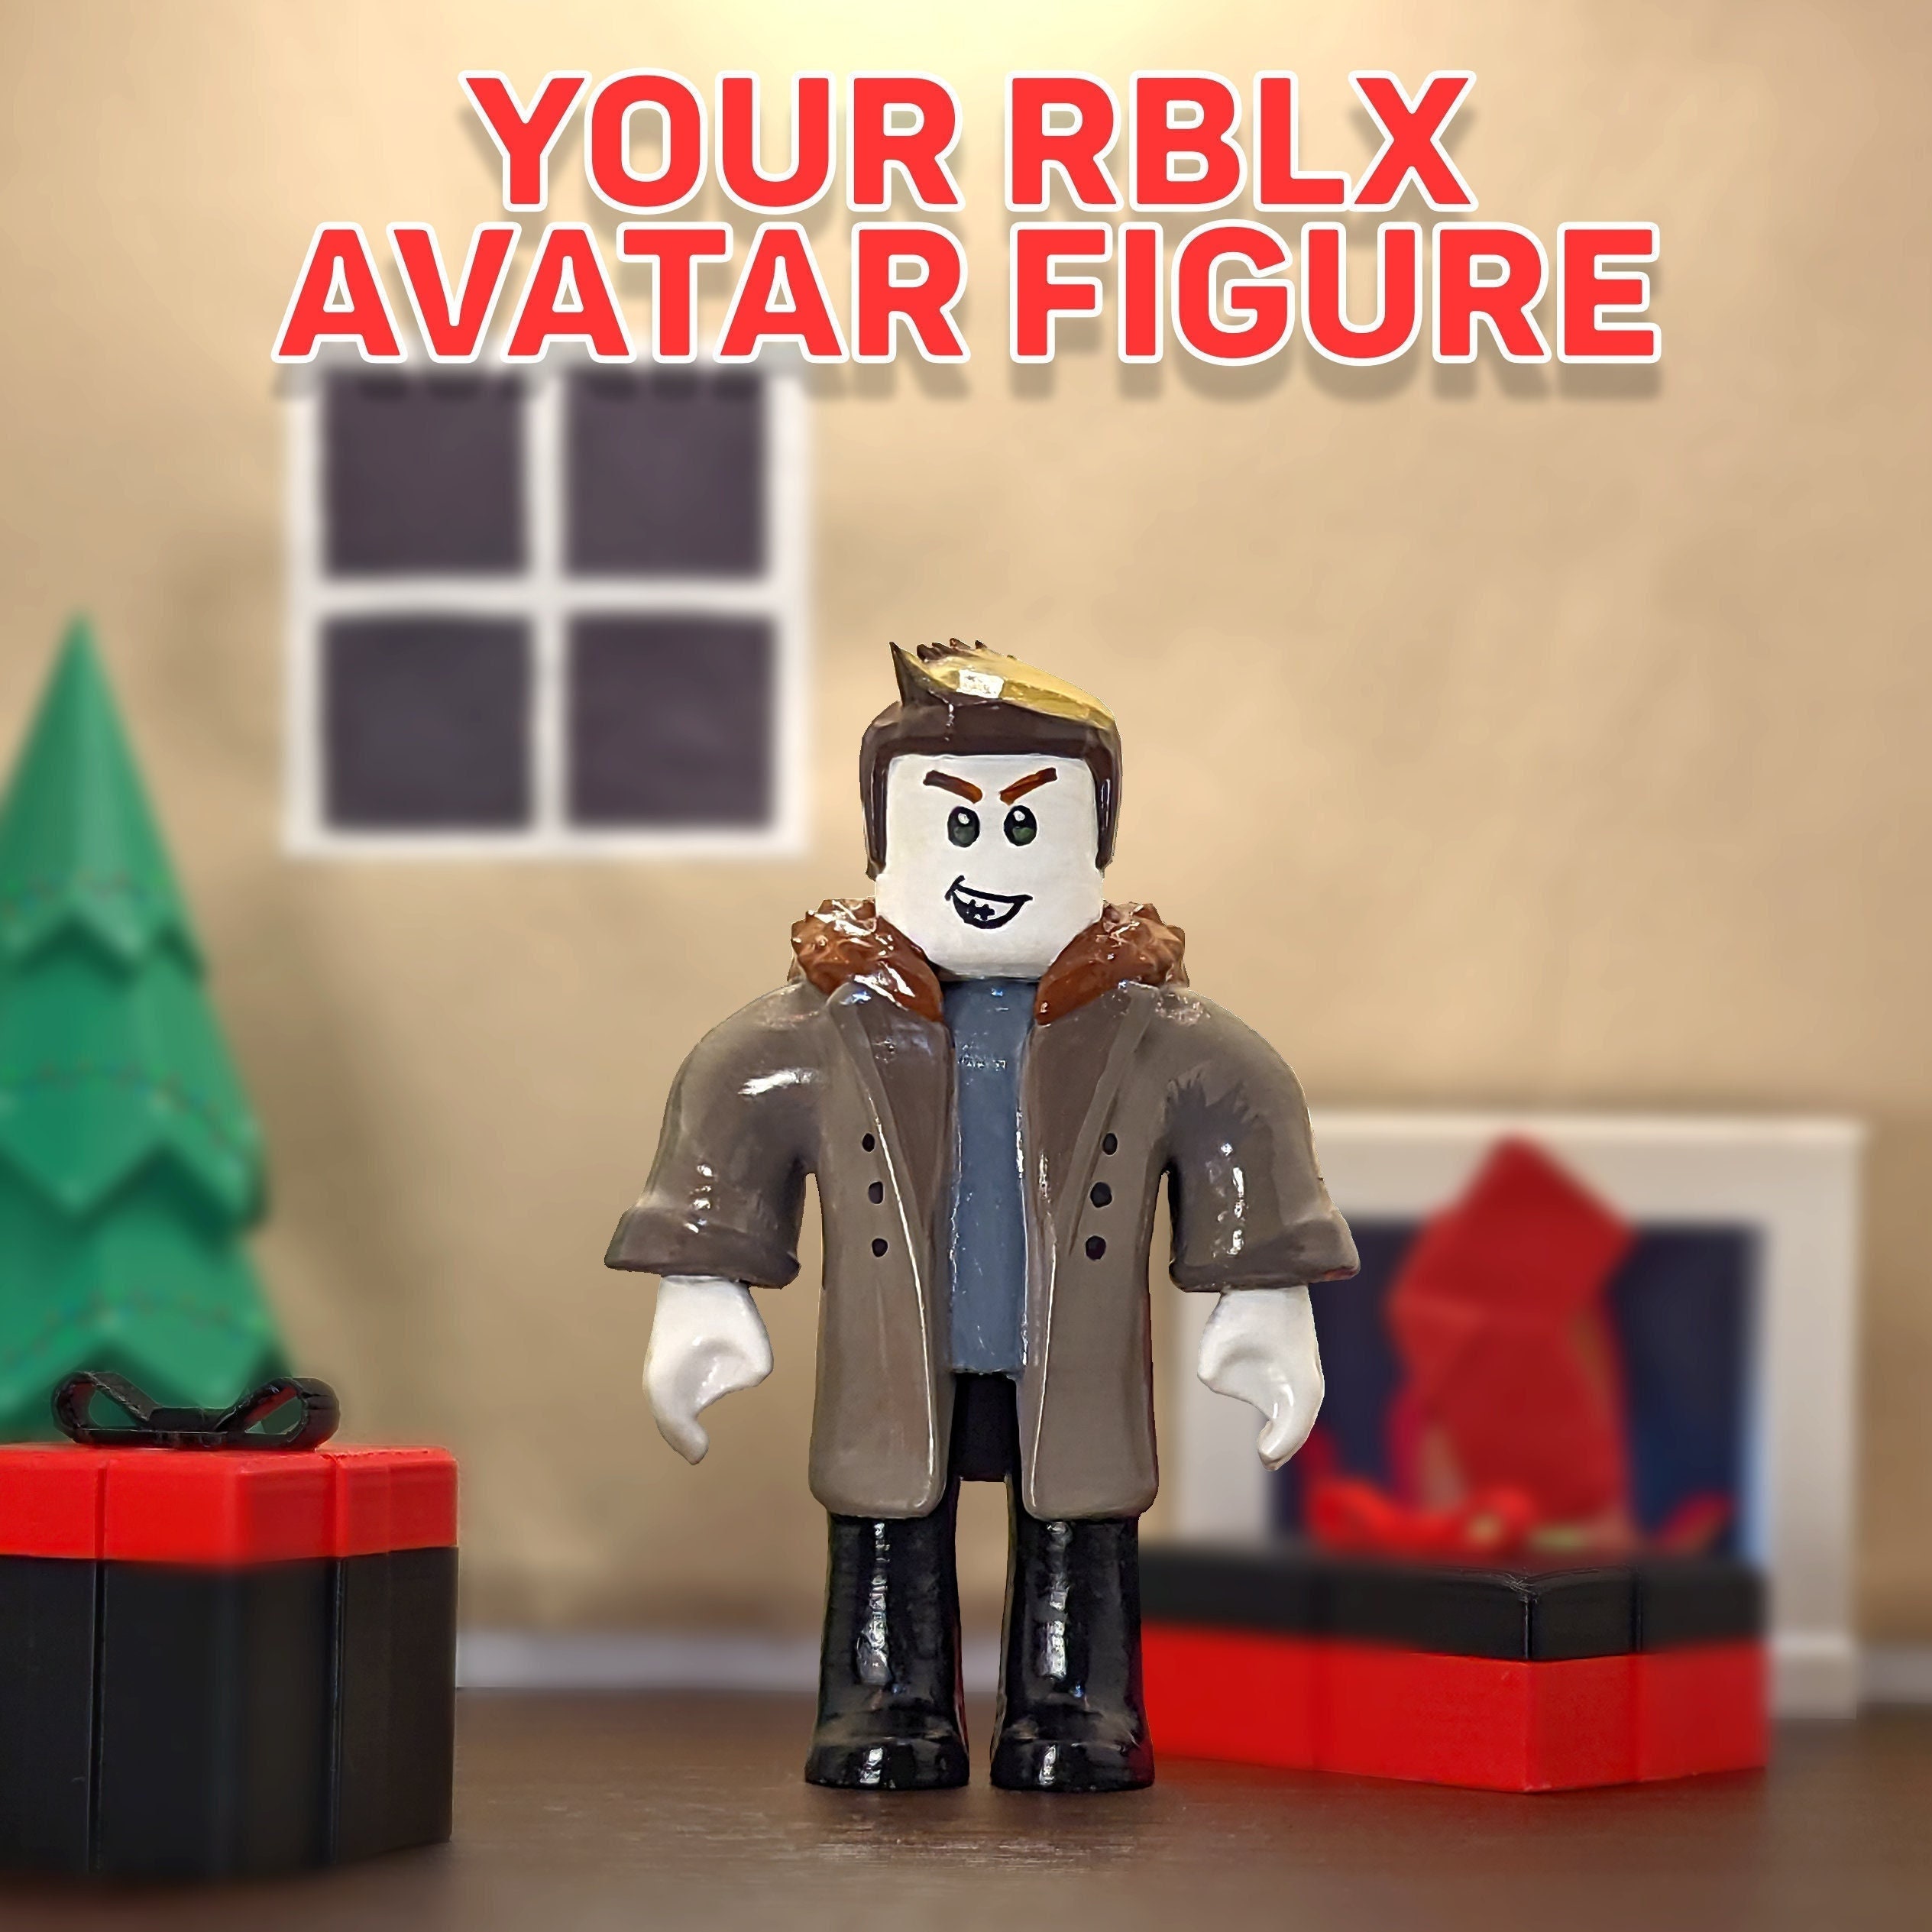 Your RBLX Avatar Figure Birthday Gift Idea for Gamers - Etsy